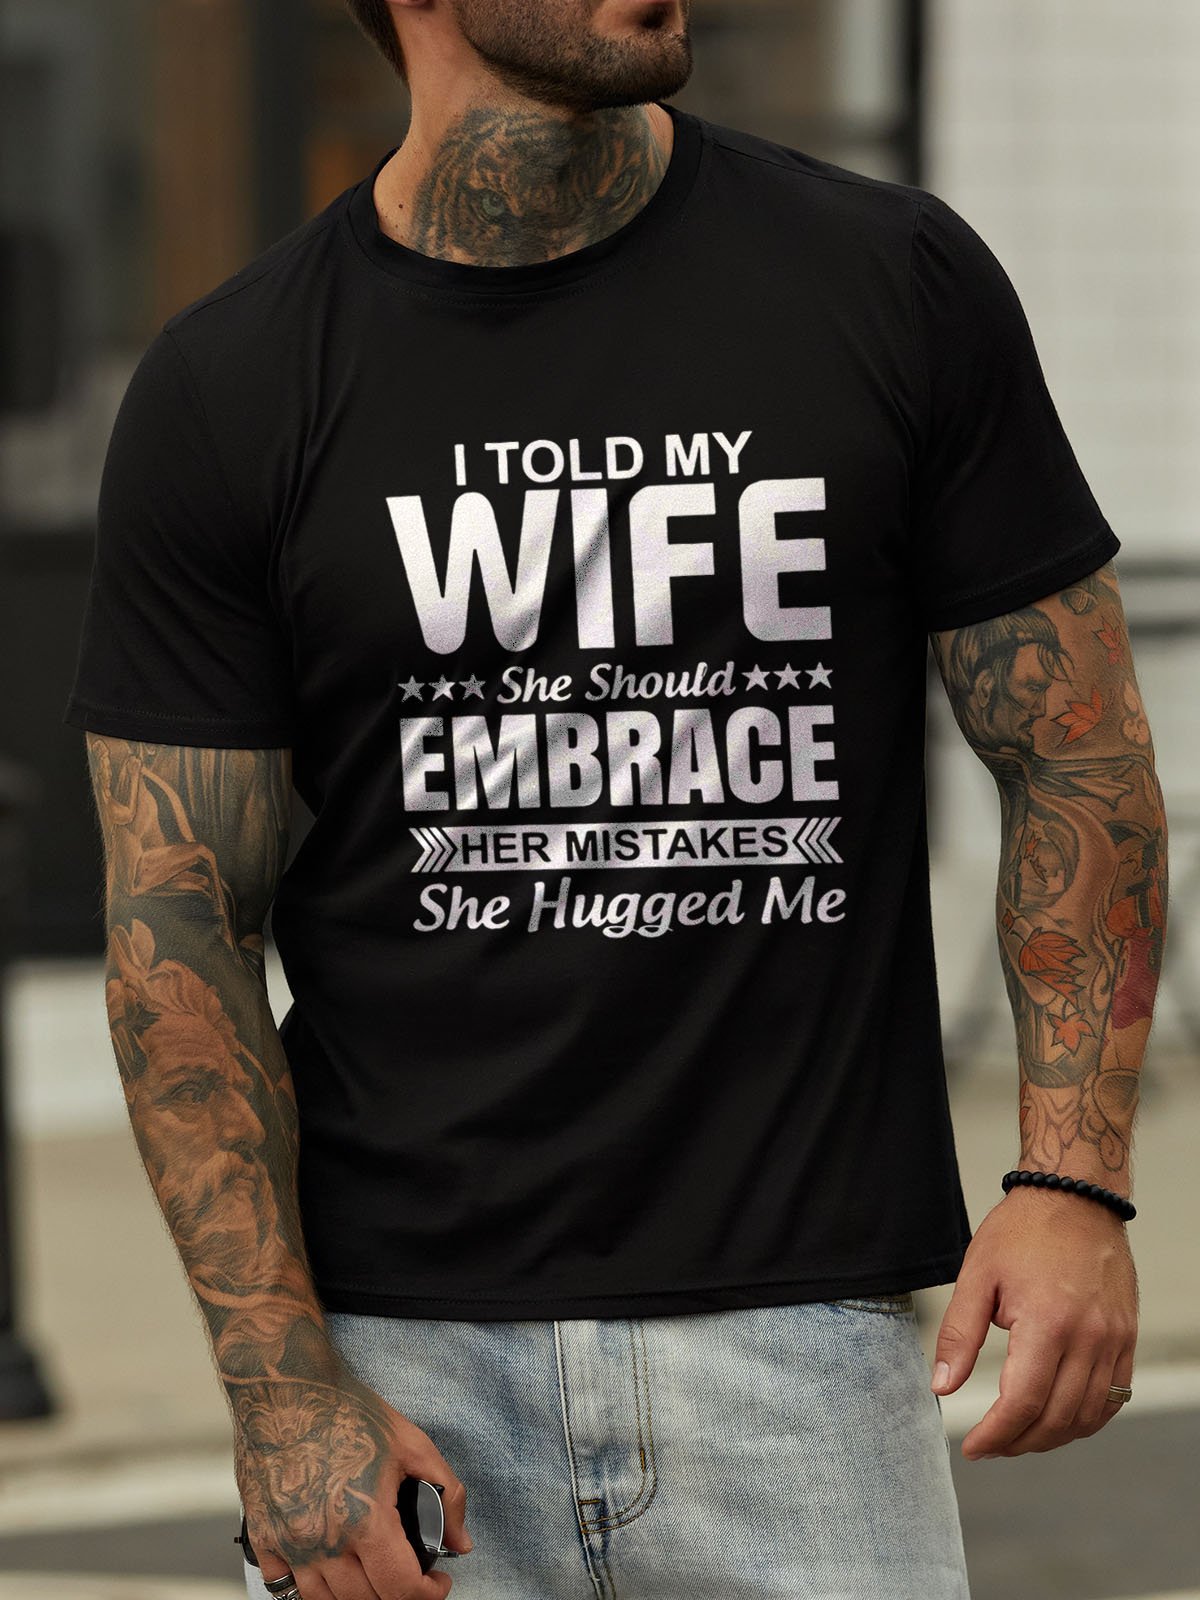 I Told My Wife She Should Embrace Her Mistakes She Hugged Me Cotton Blends Casual Short Sleeve Letter Shirt & Top